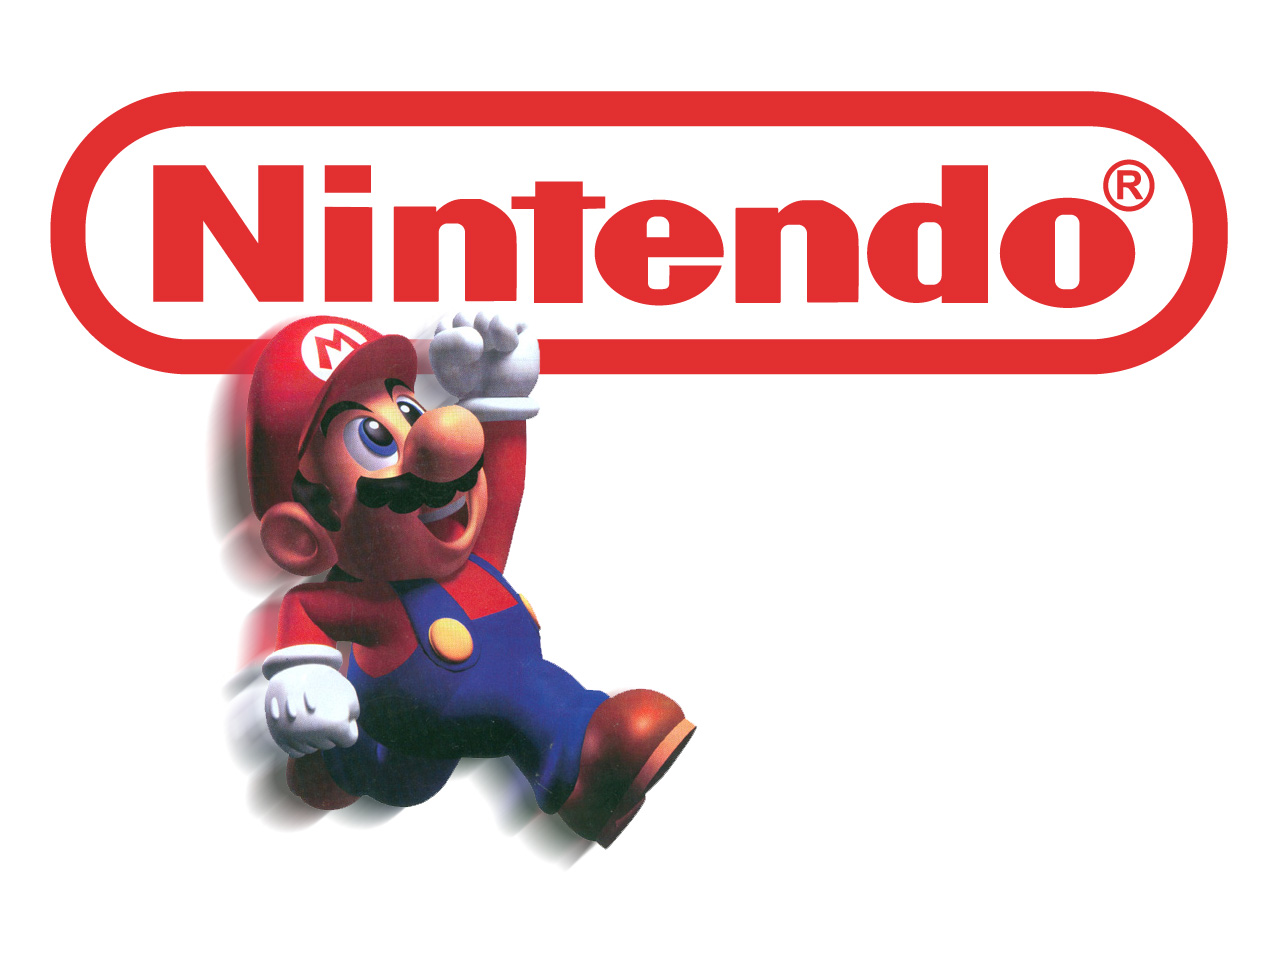 Nintendo Explains Why They Won't Develop Smartphone Games – EMGN